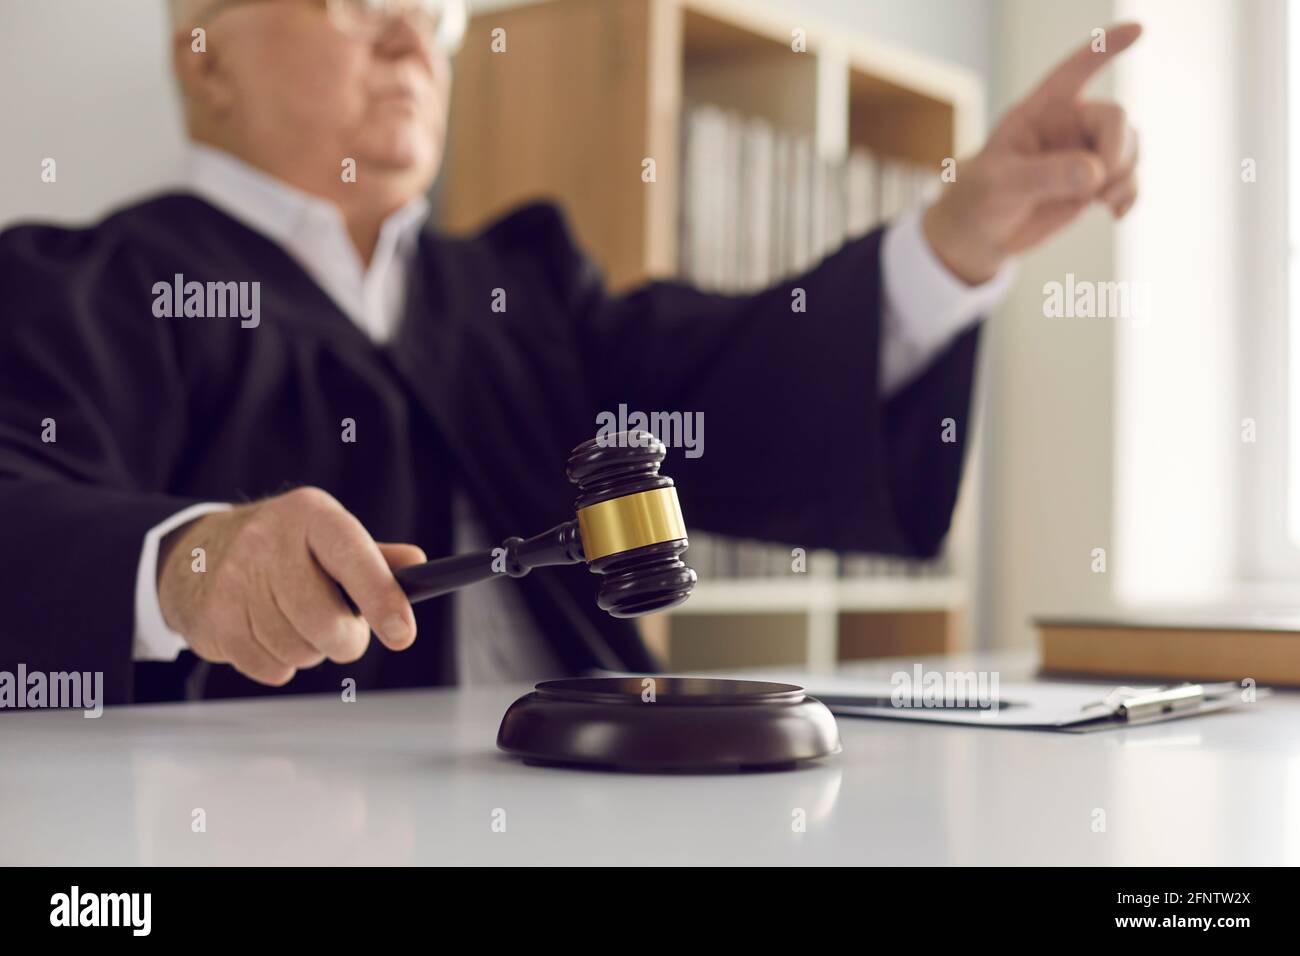 Hammer blow made by a mature judge passing sentence and announcing the closure of the case. Stock Photo